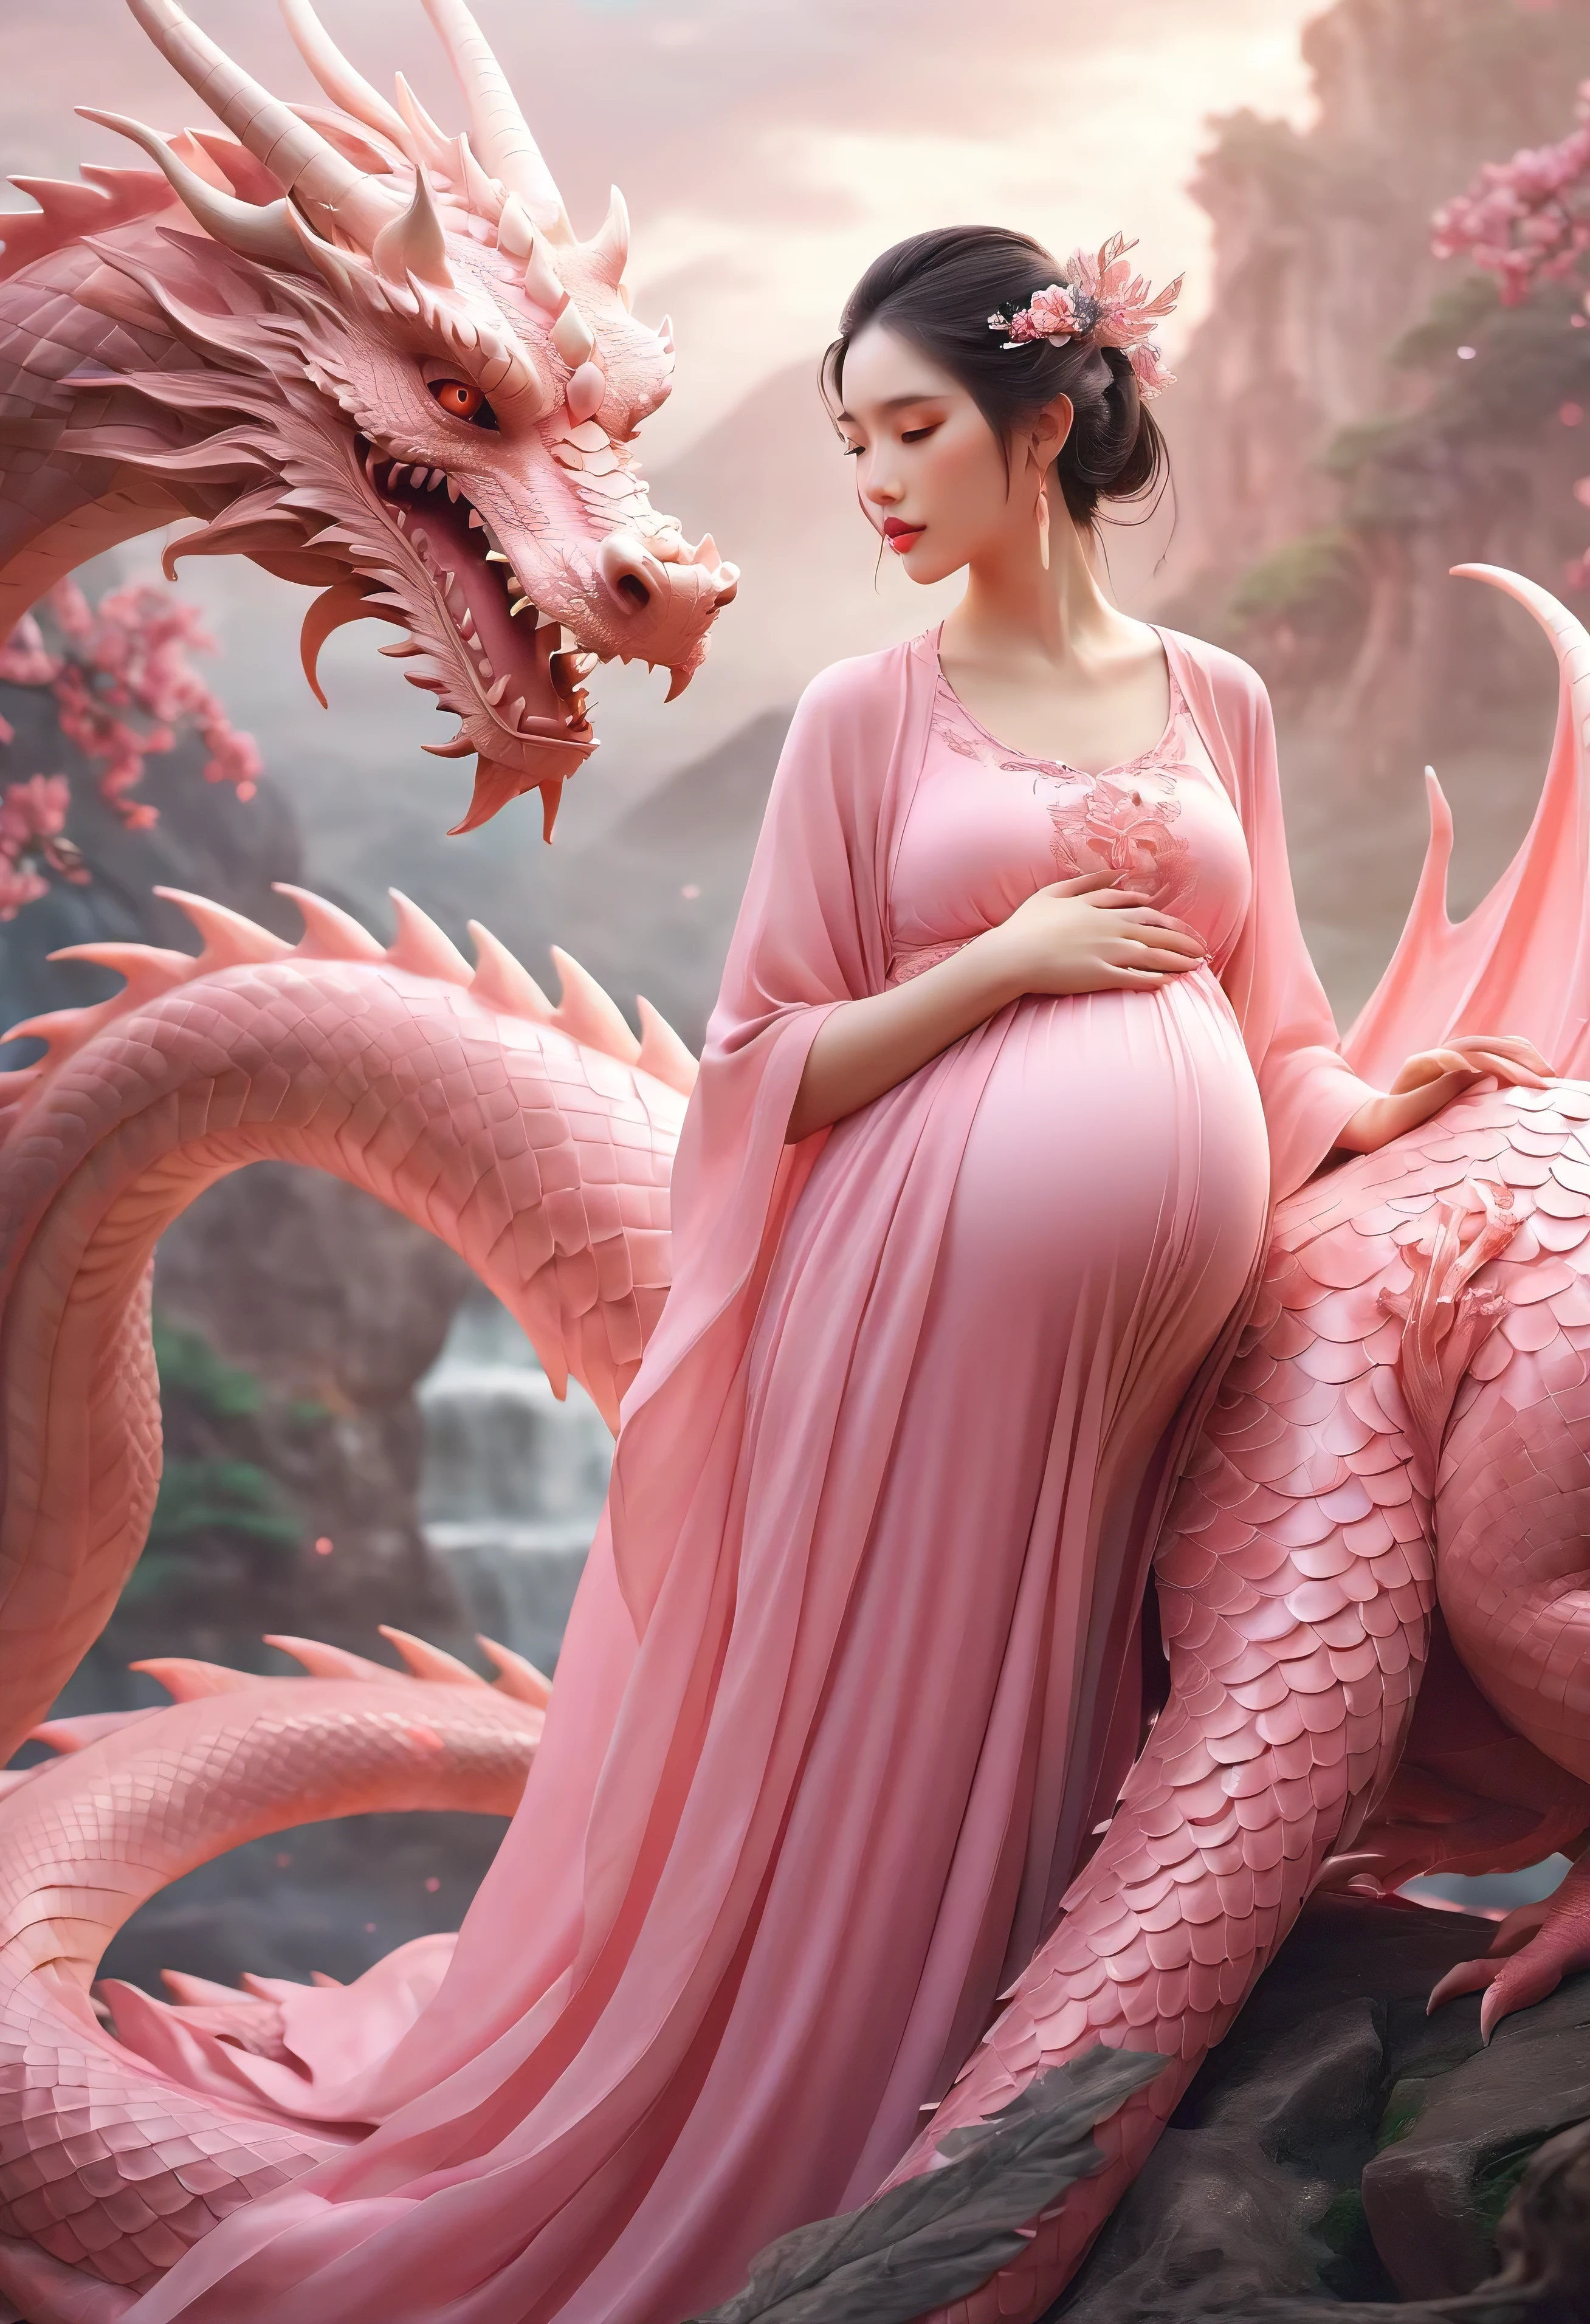 a pregnant woman woman in a pink dress with a dragon on her back, xianxia fantasy, chinese fantasy, beautiful fantasy art, dragon girl, very beautiful fantasy art, amazing fantasy art, beautiful fantasy, fantasy beautiful, digital fantasy art ), human and dragon fusion, breathtaking fantasy art, fantasy art, fantasy art style, soft delicate draconic features